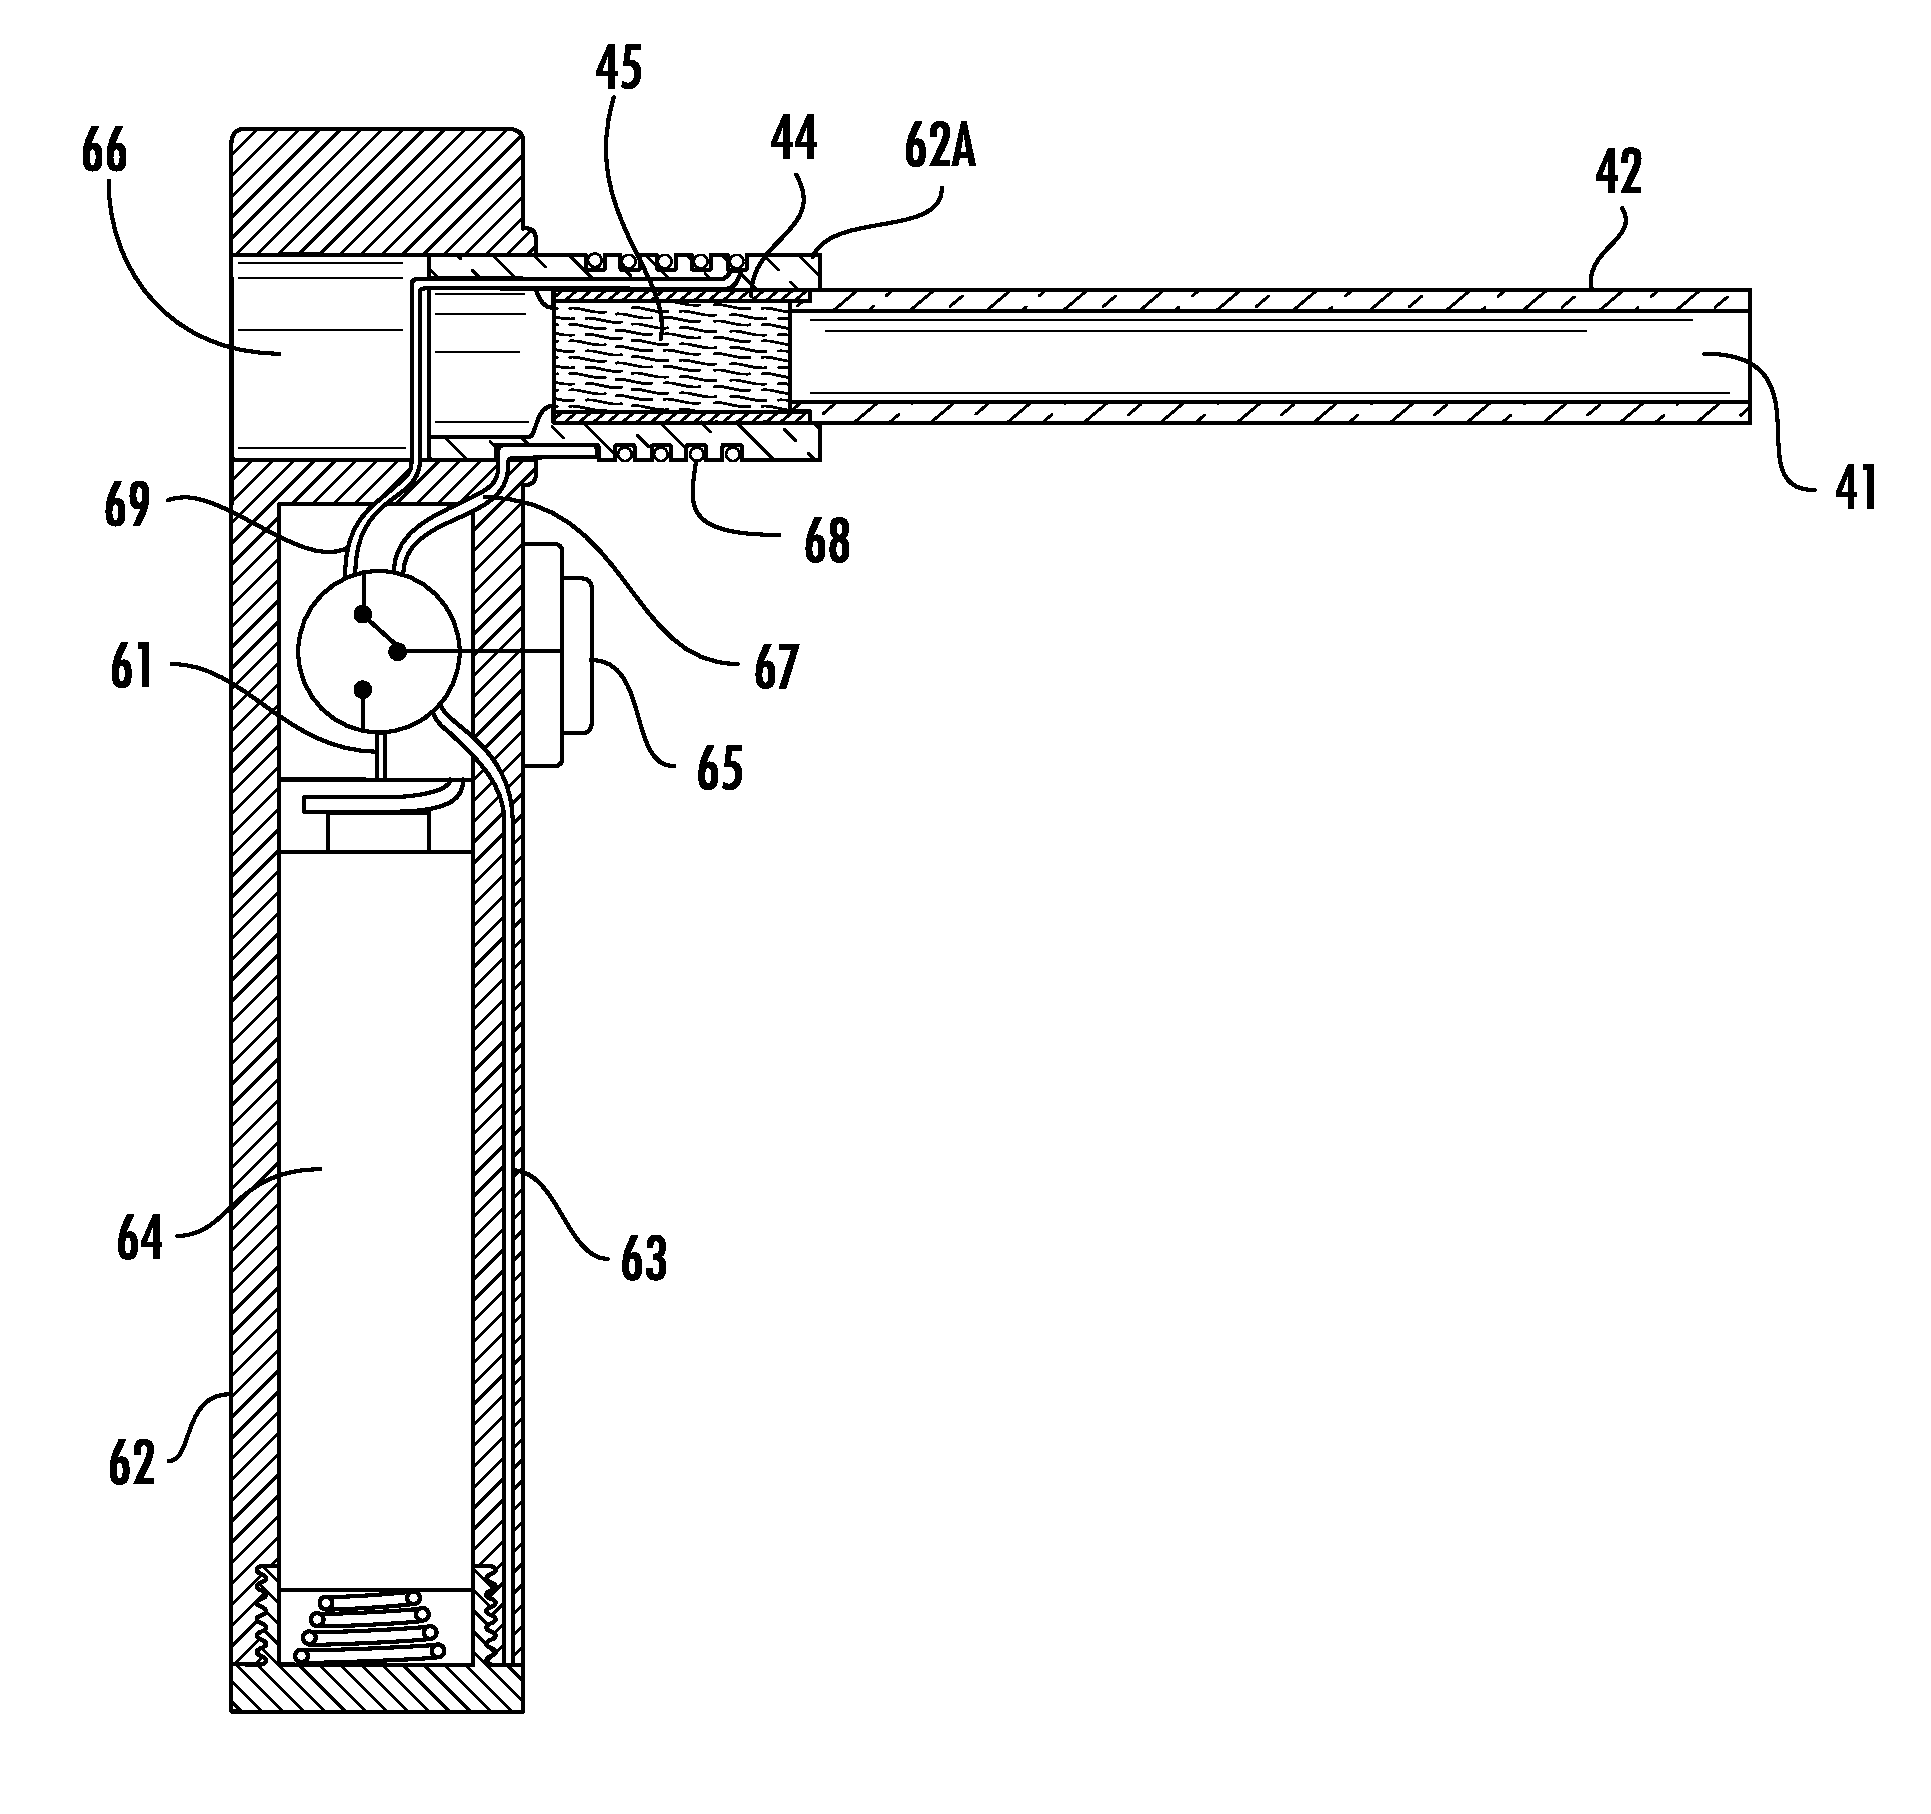 Devices for vaporizing and delivering an aerosol agent